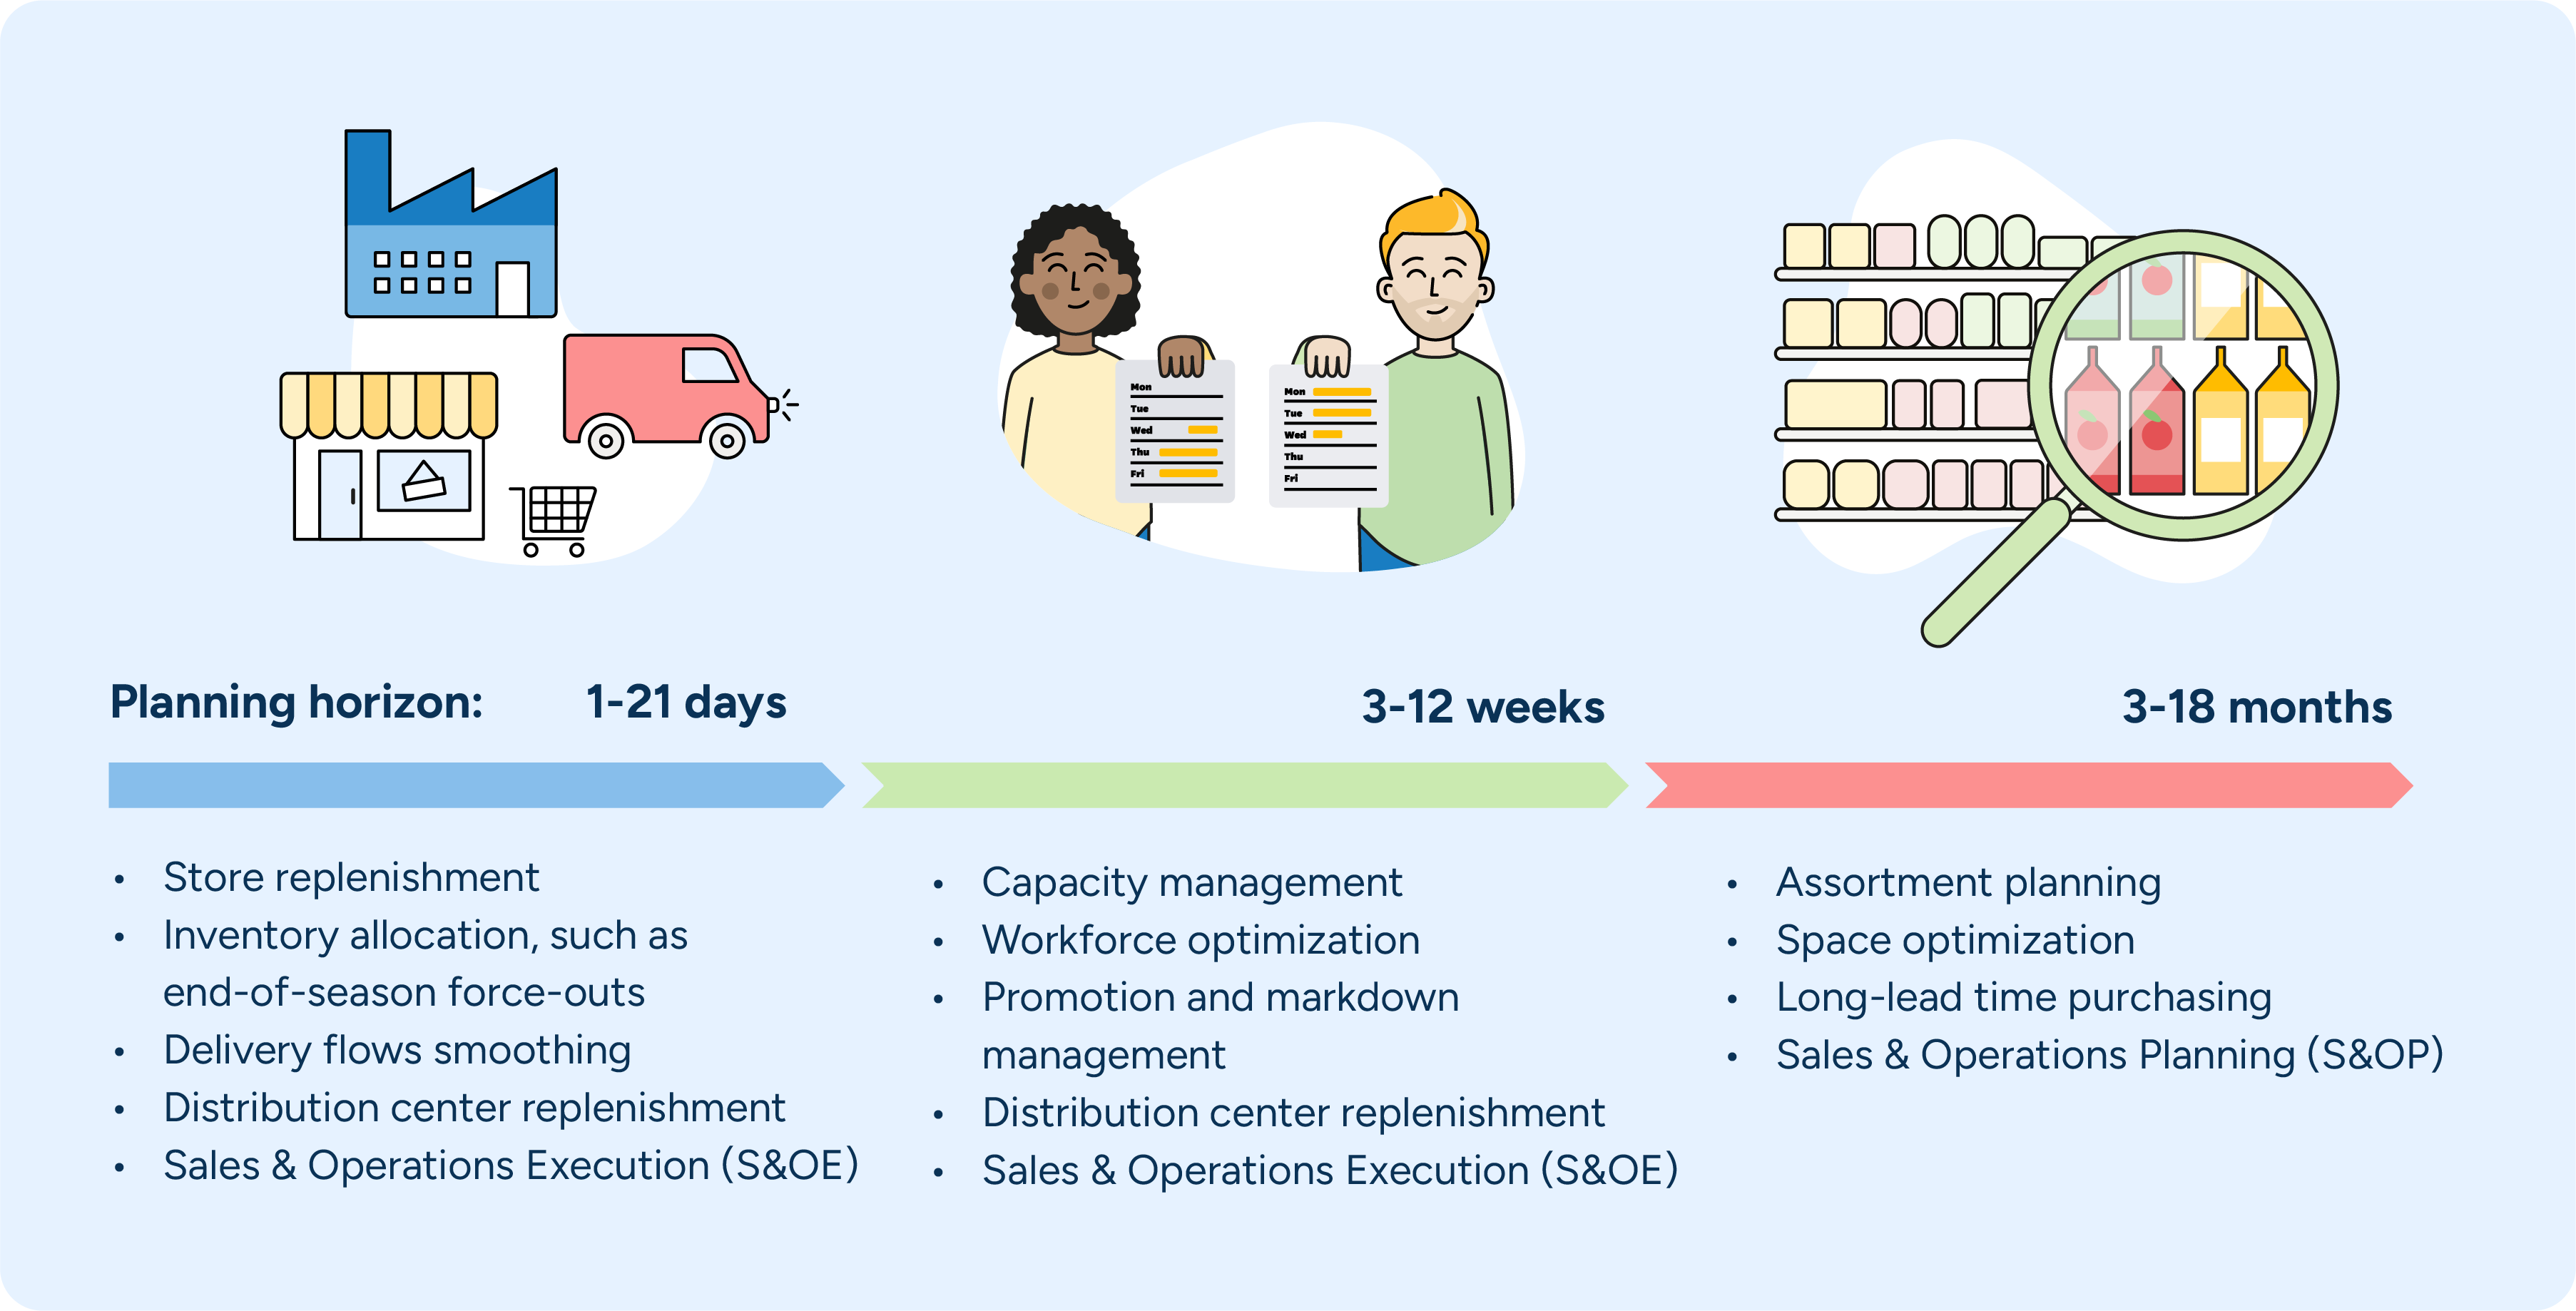 An illustration showing how different demand planning horizons support retail processes.